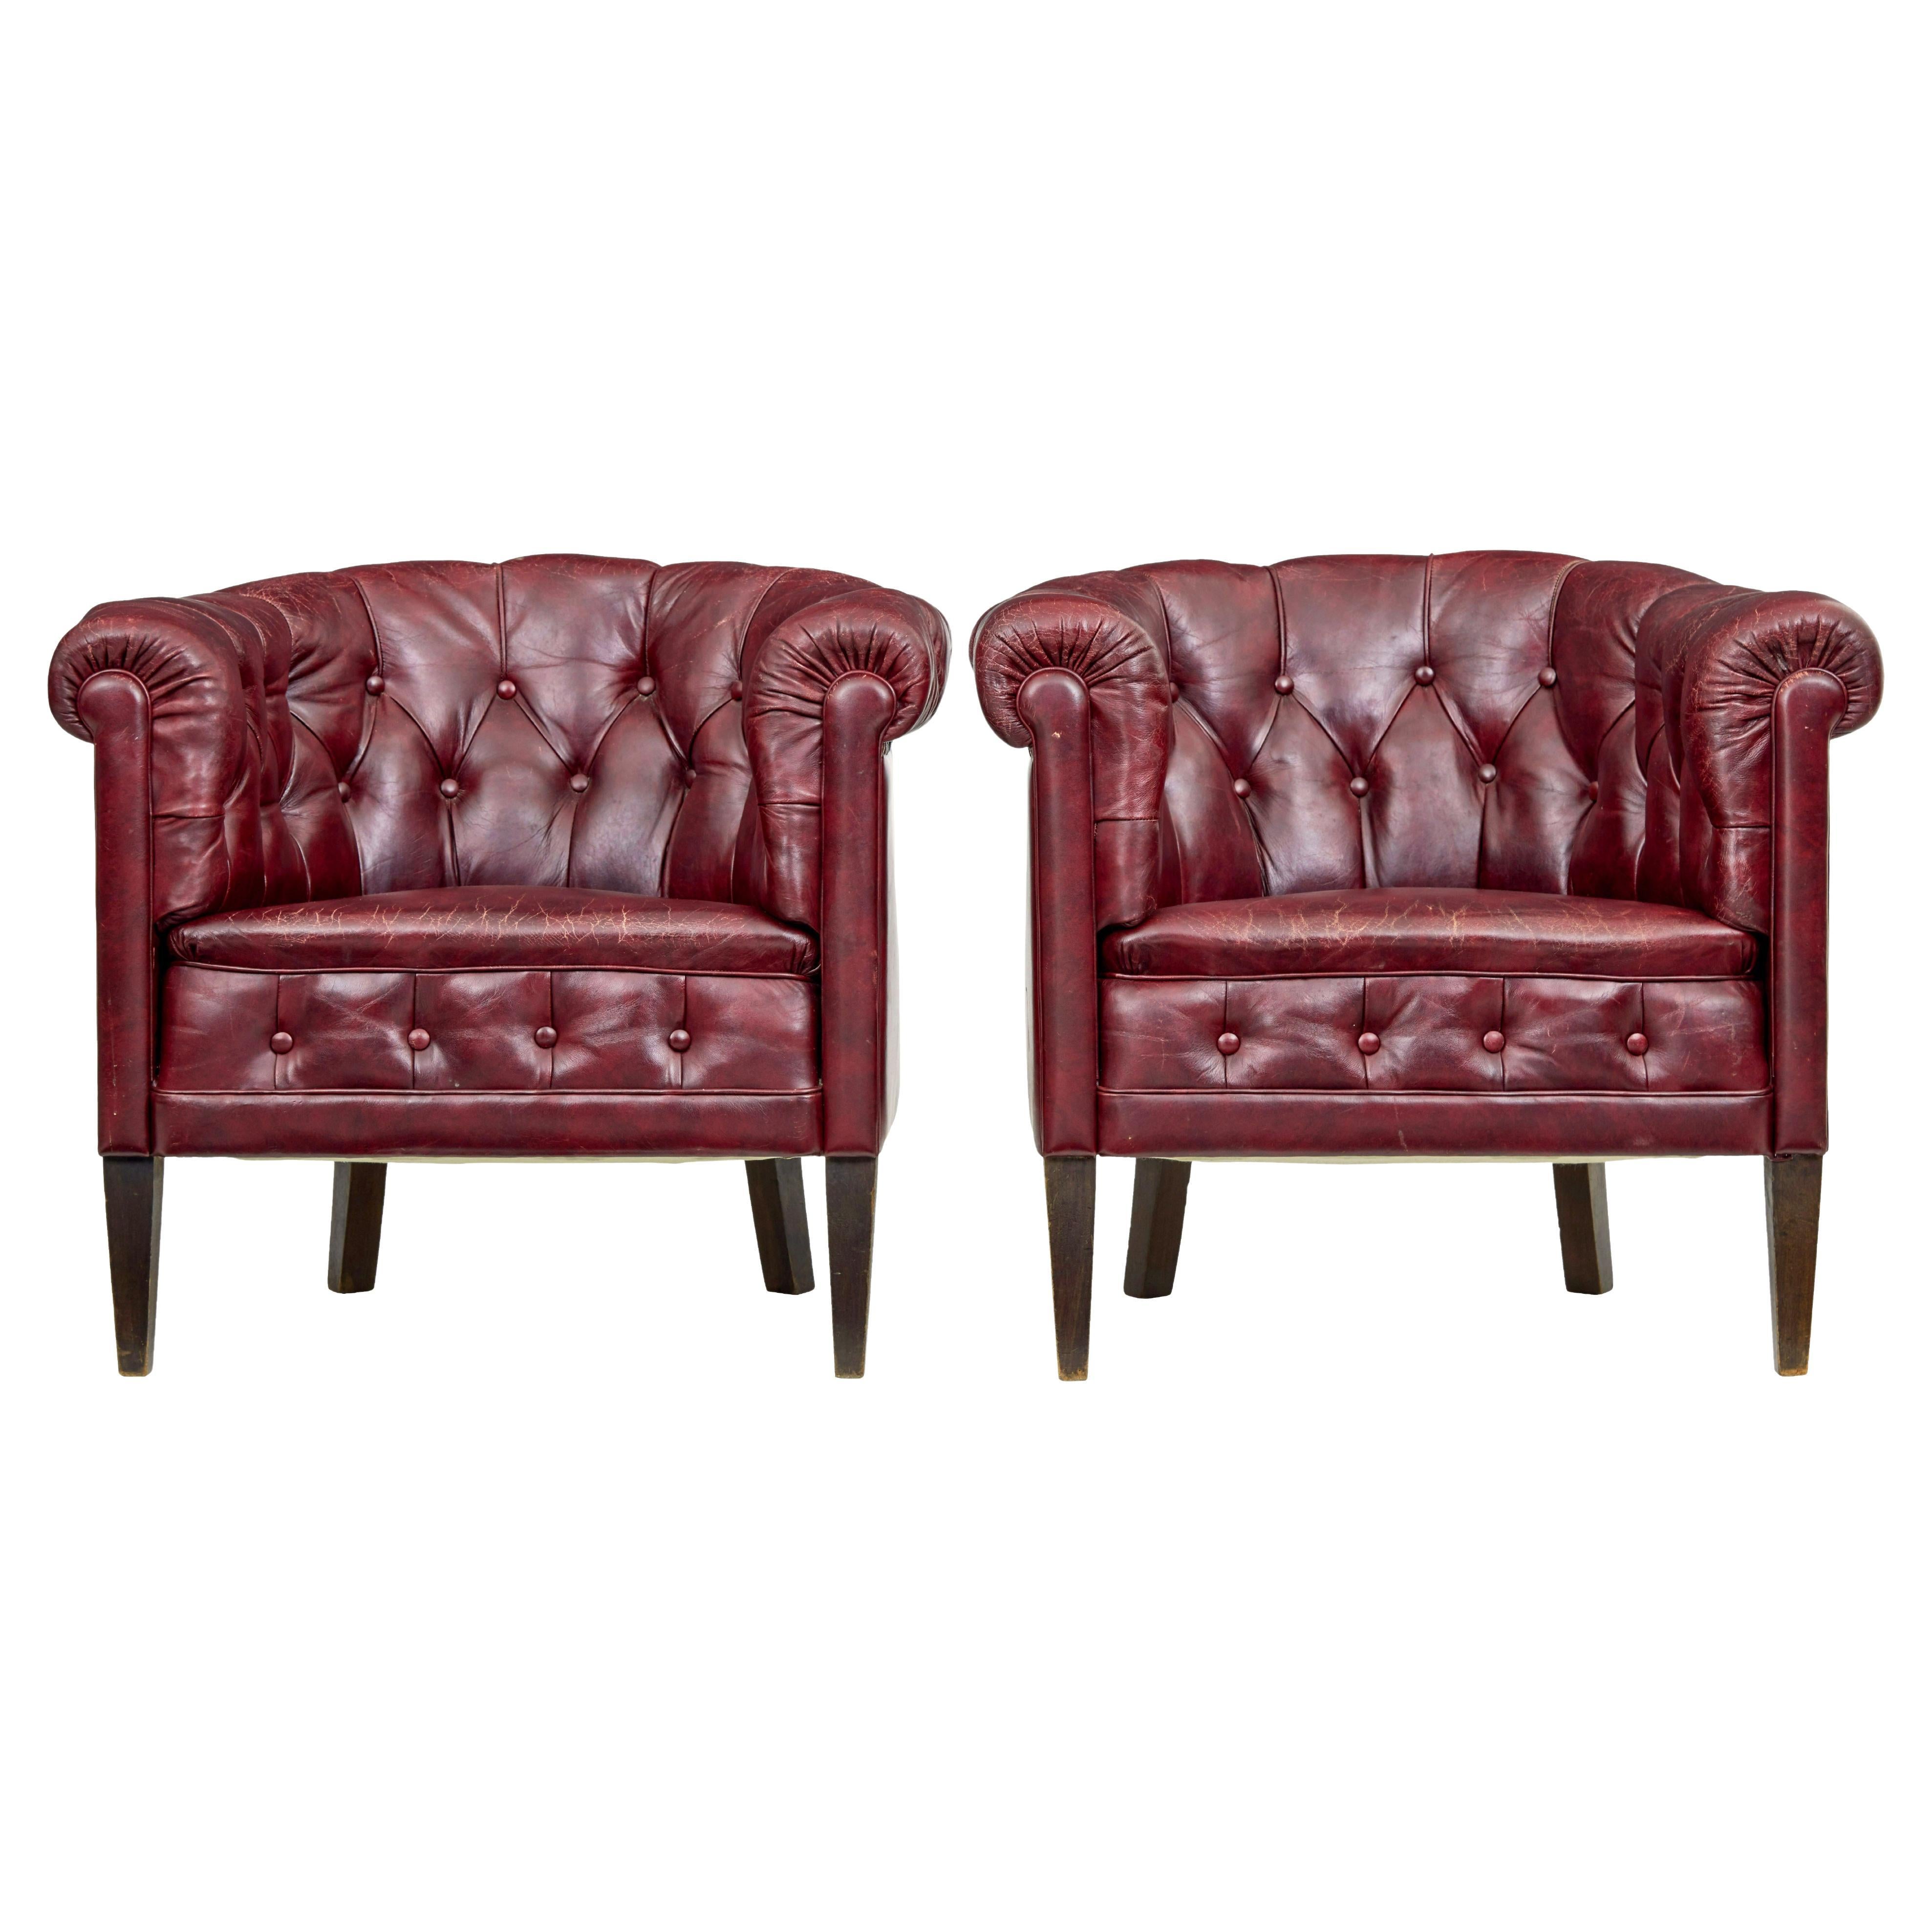 Pair of mid 20th century red leather club armchairs